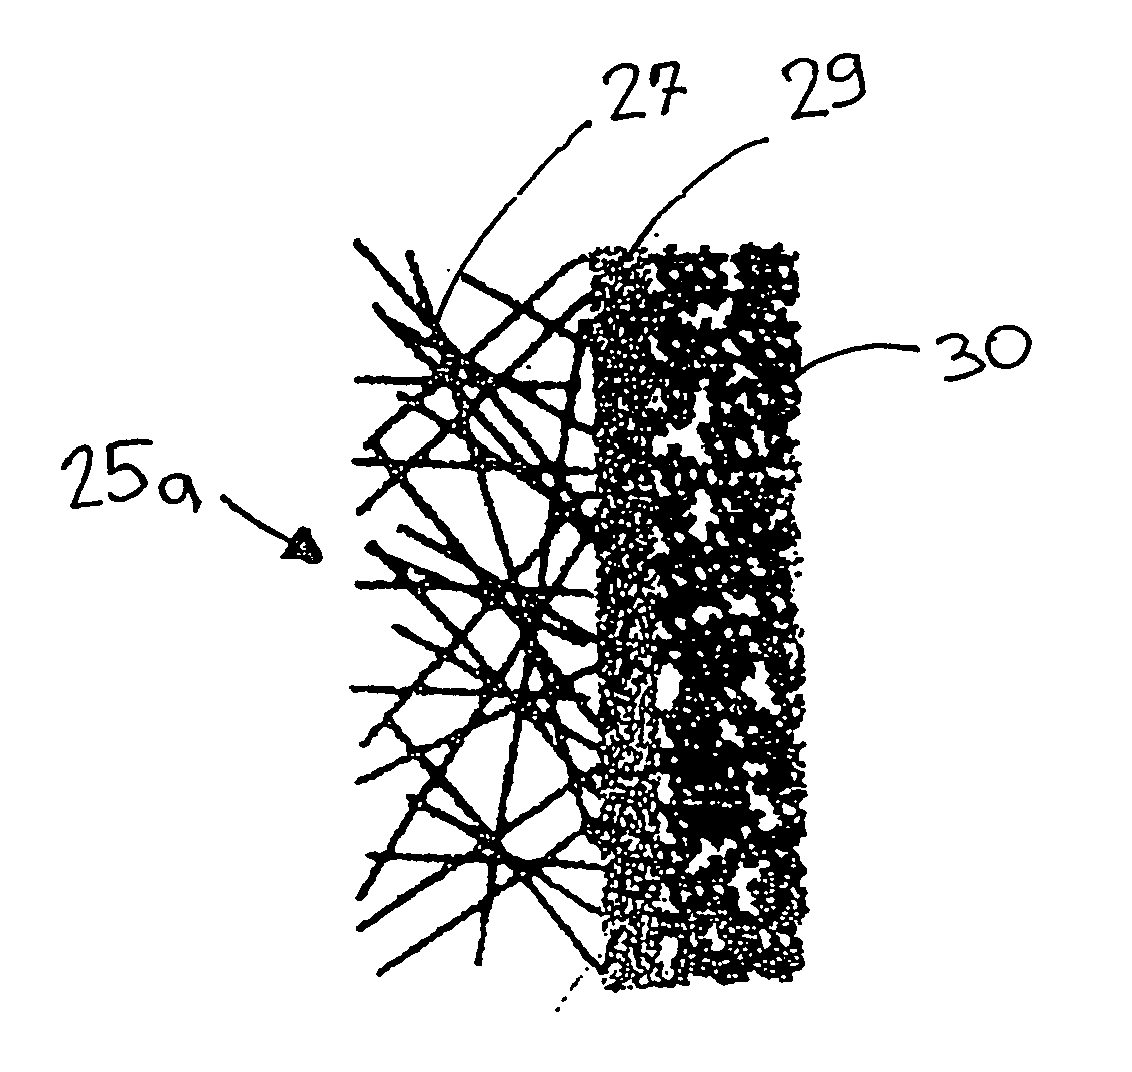 Process to manufacture an ion-permeable and electrically conducting flat material, the material obtained according to the process, and fuel cells